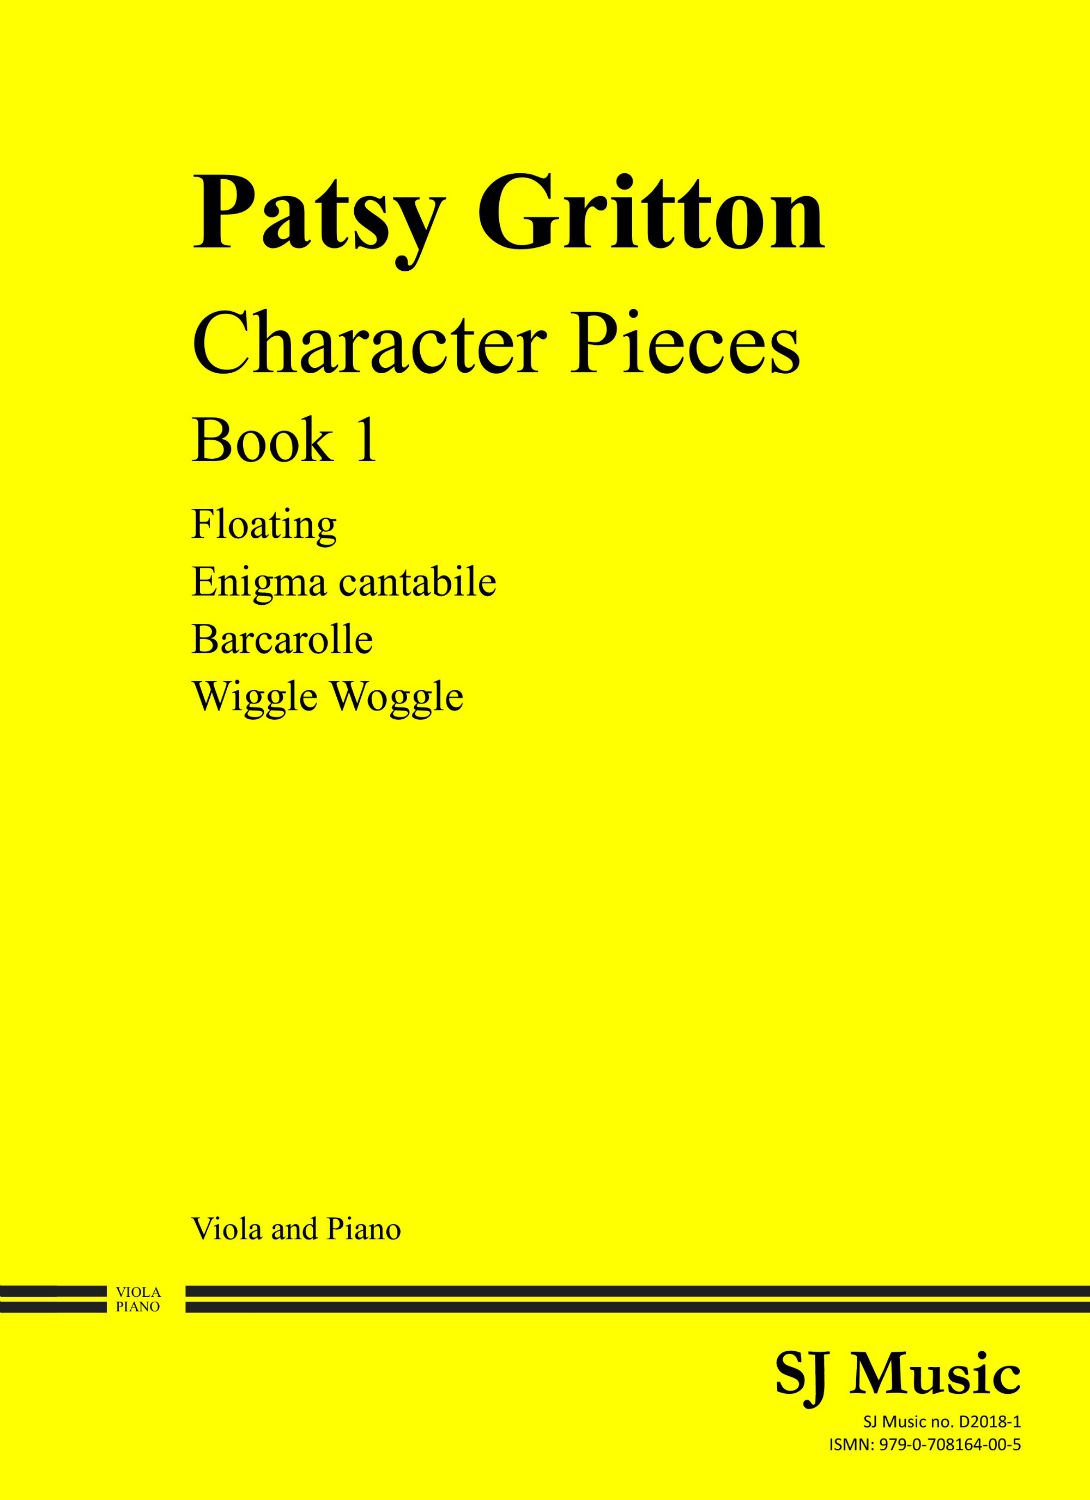 Gritton: Character Pieces Book 1 for Viola published by SJ Music